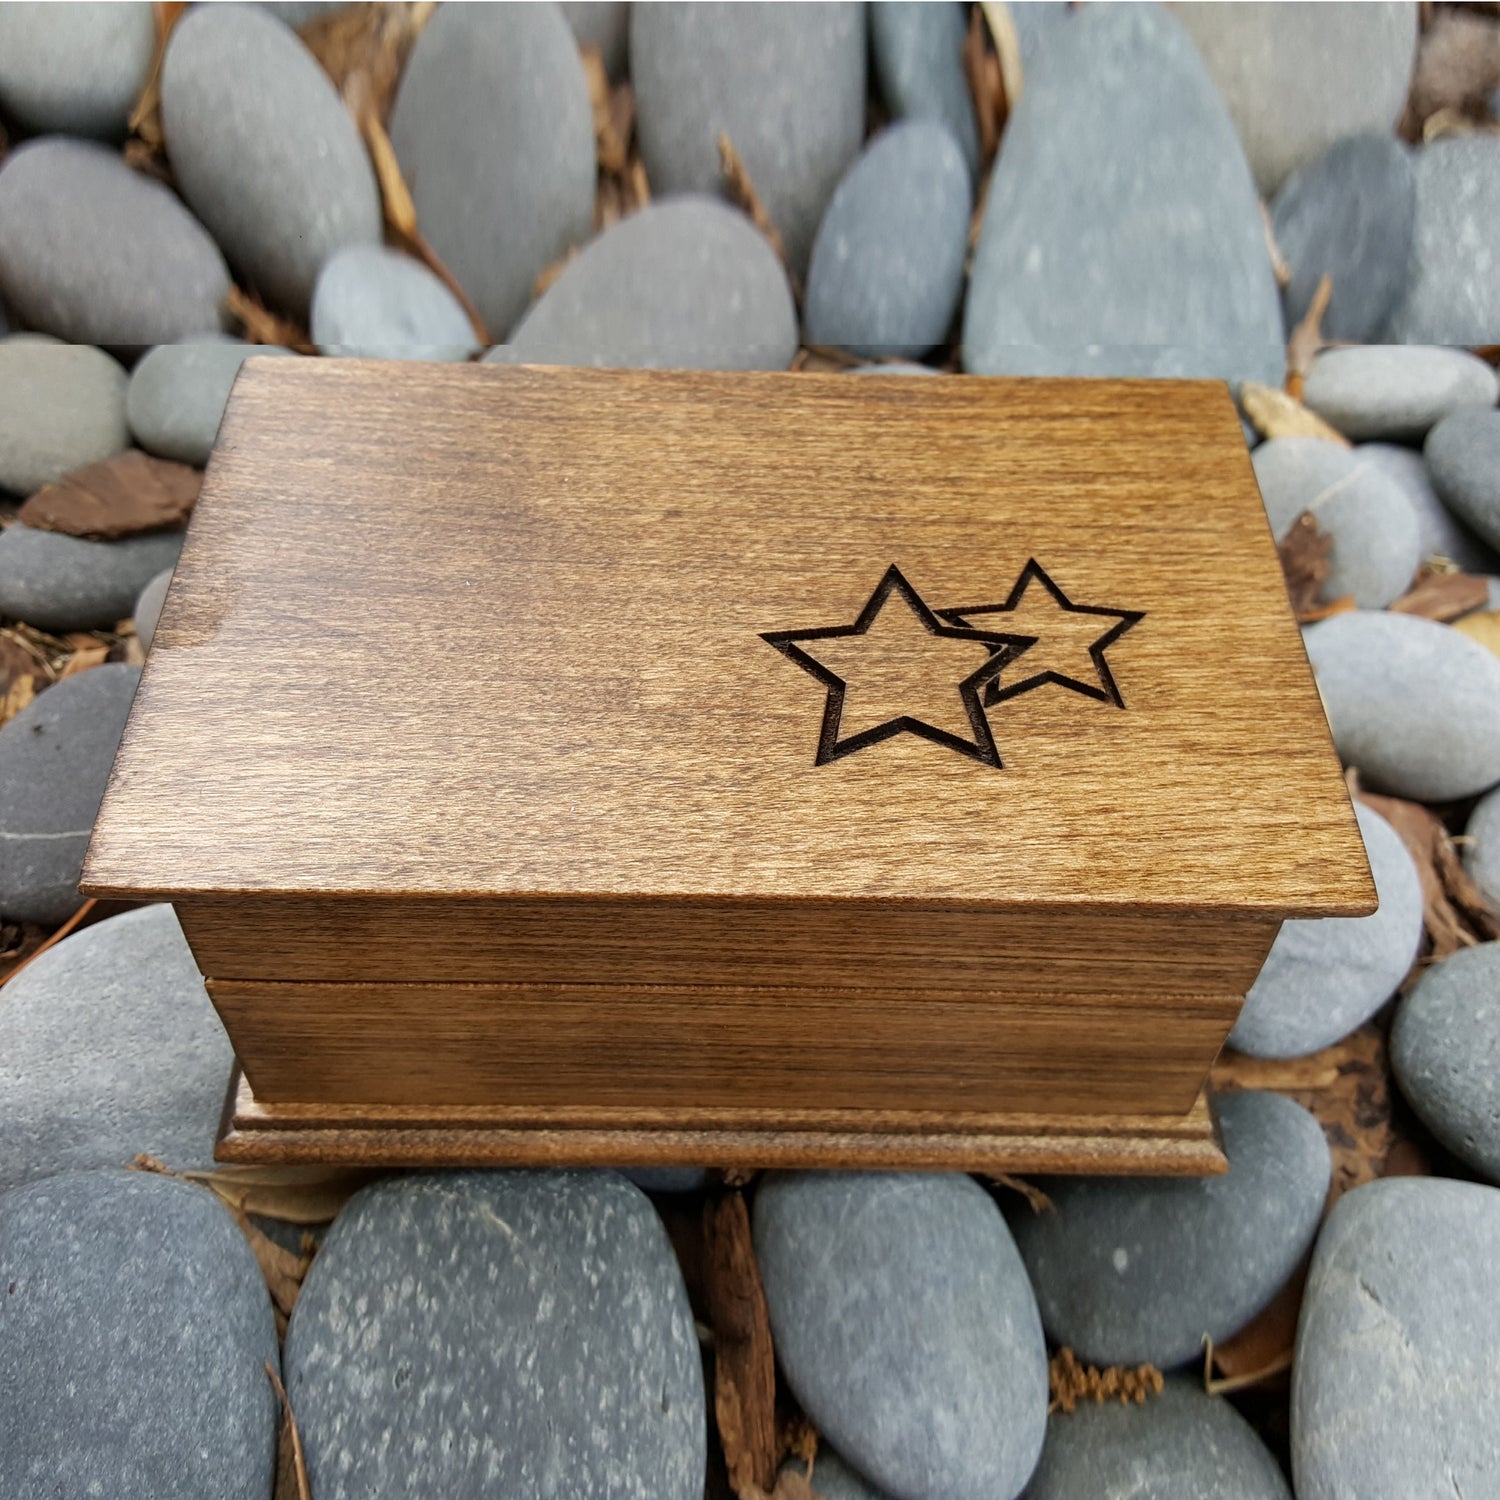 handmade wooden jewelry box with stars engraved on top, choose color and song